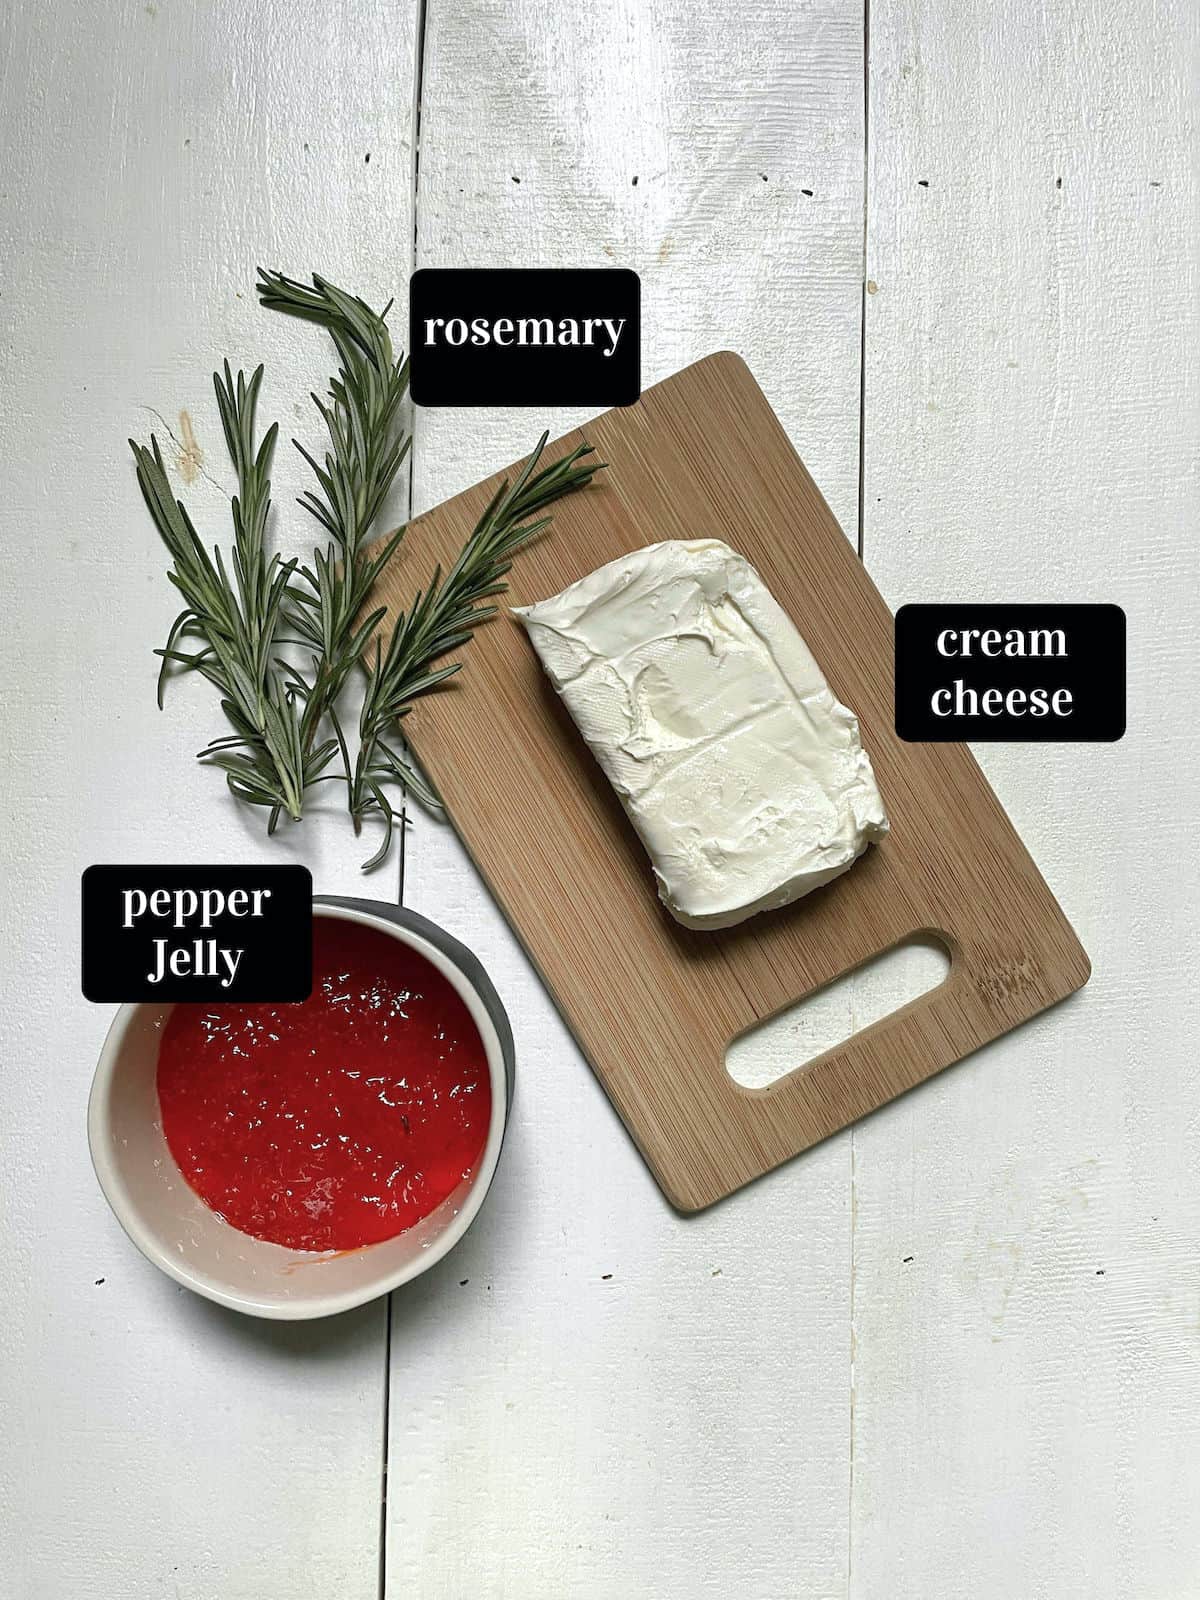 Cream cheese, red pepper jelly, and rosemary on a white board.